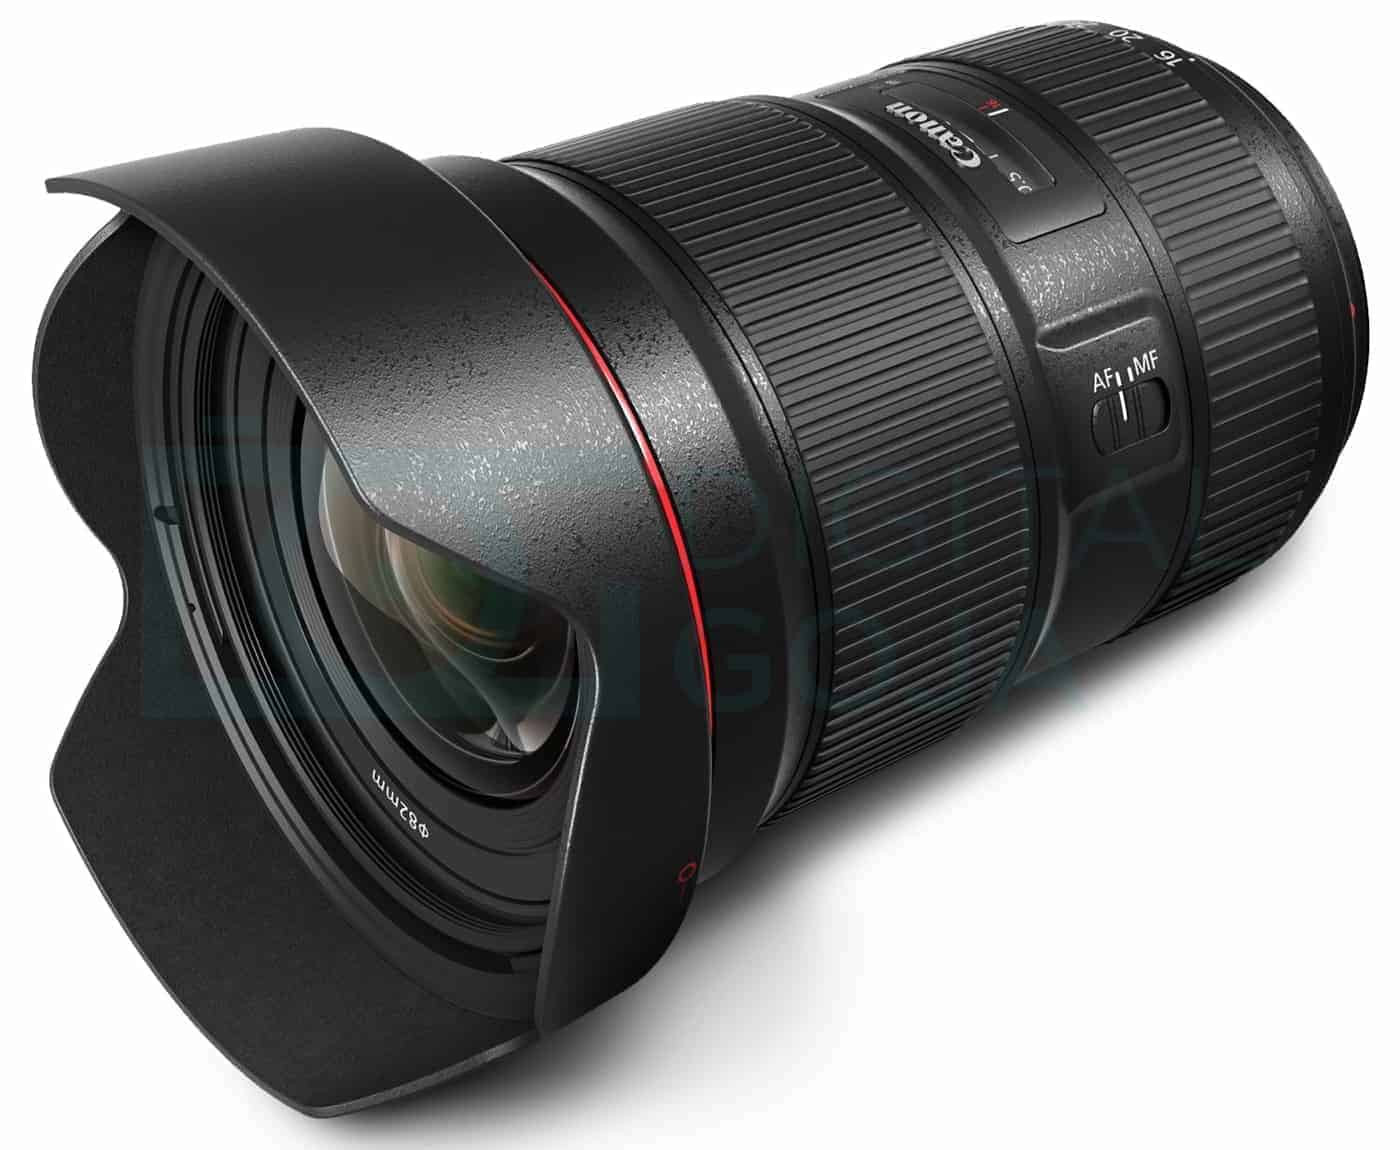 Best ideas about Best Canon Lens For Landscape
. Save or Pin Best Canon Landscape Lenses pared 6 Top Picks in 2018 Now.